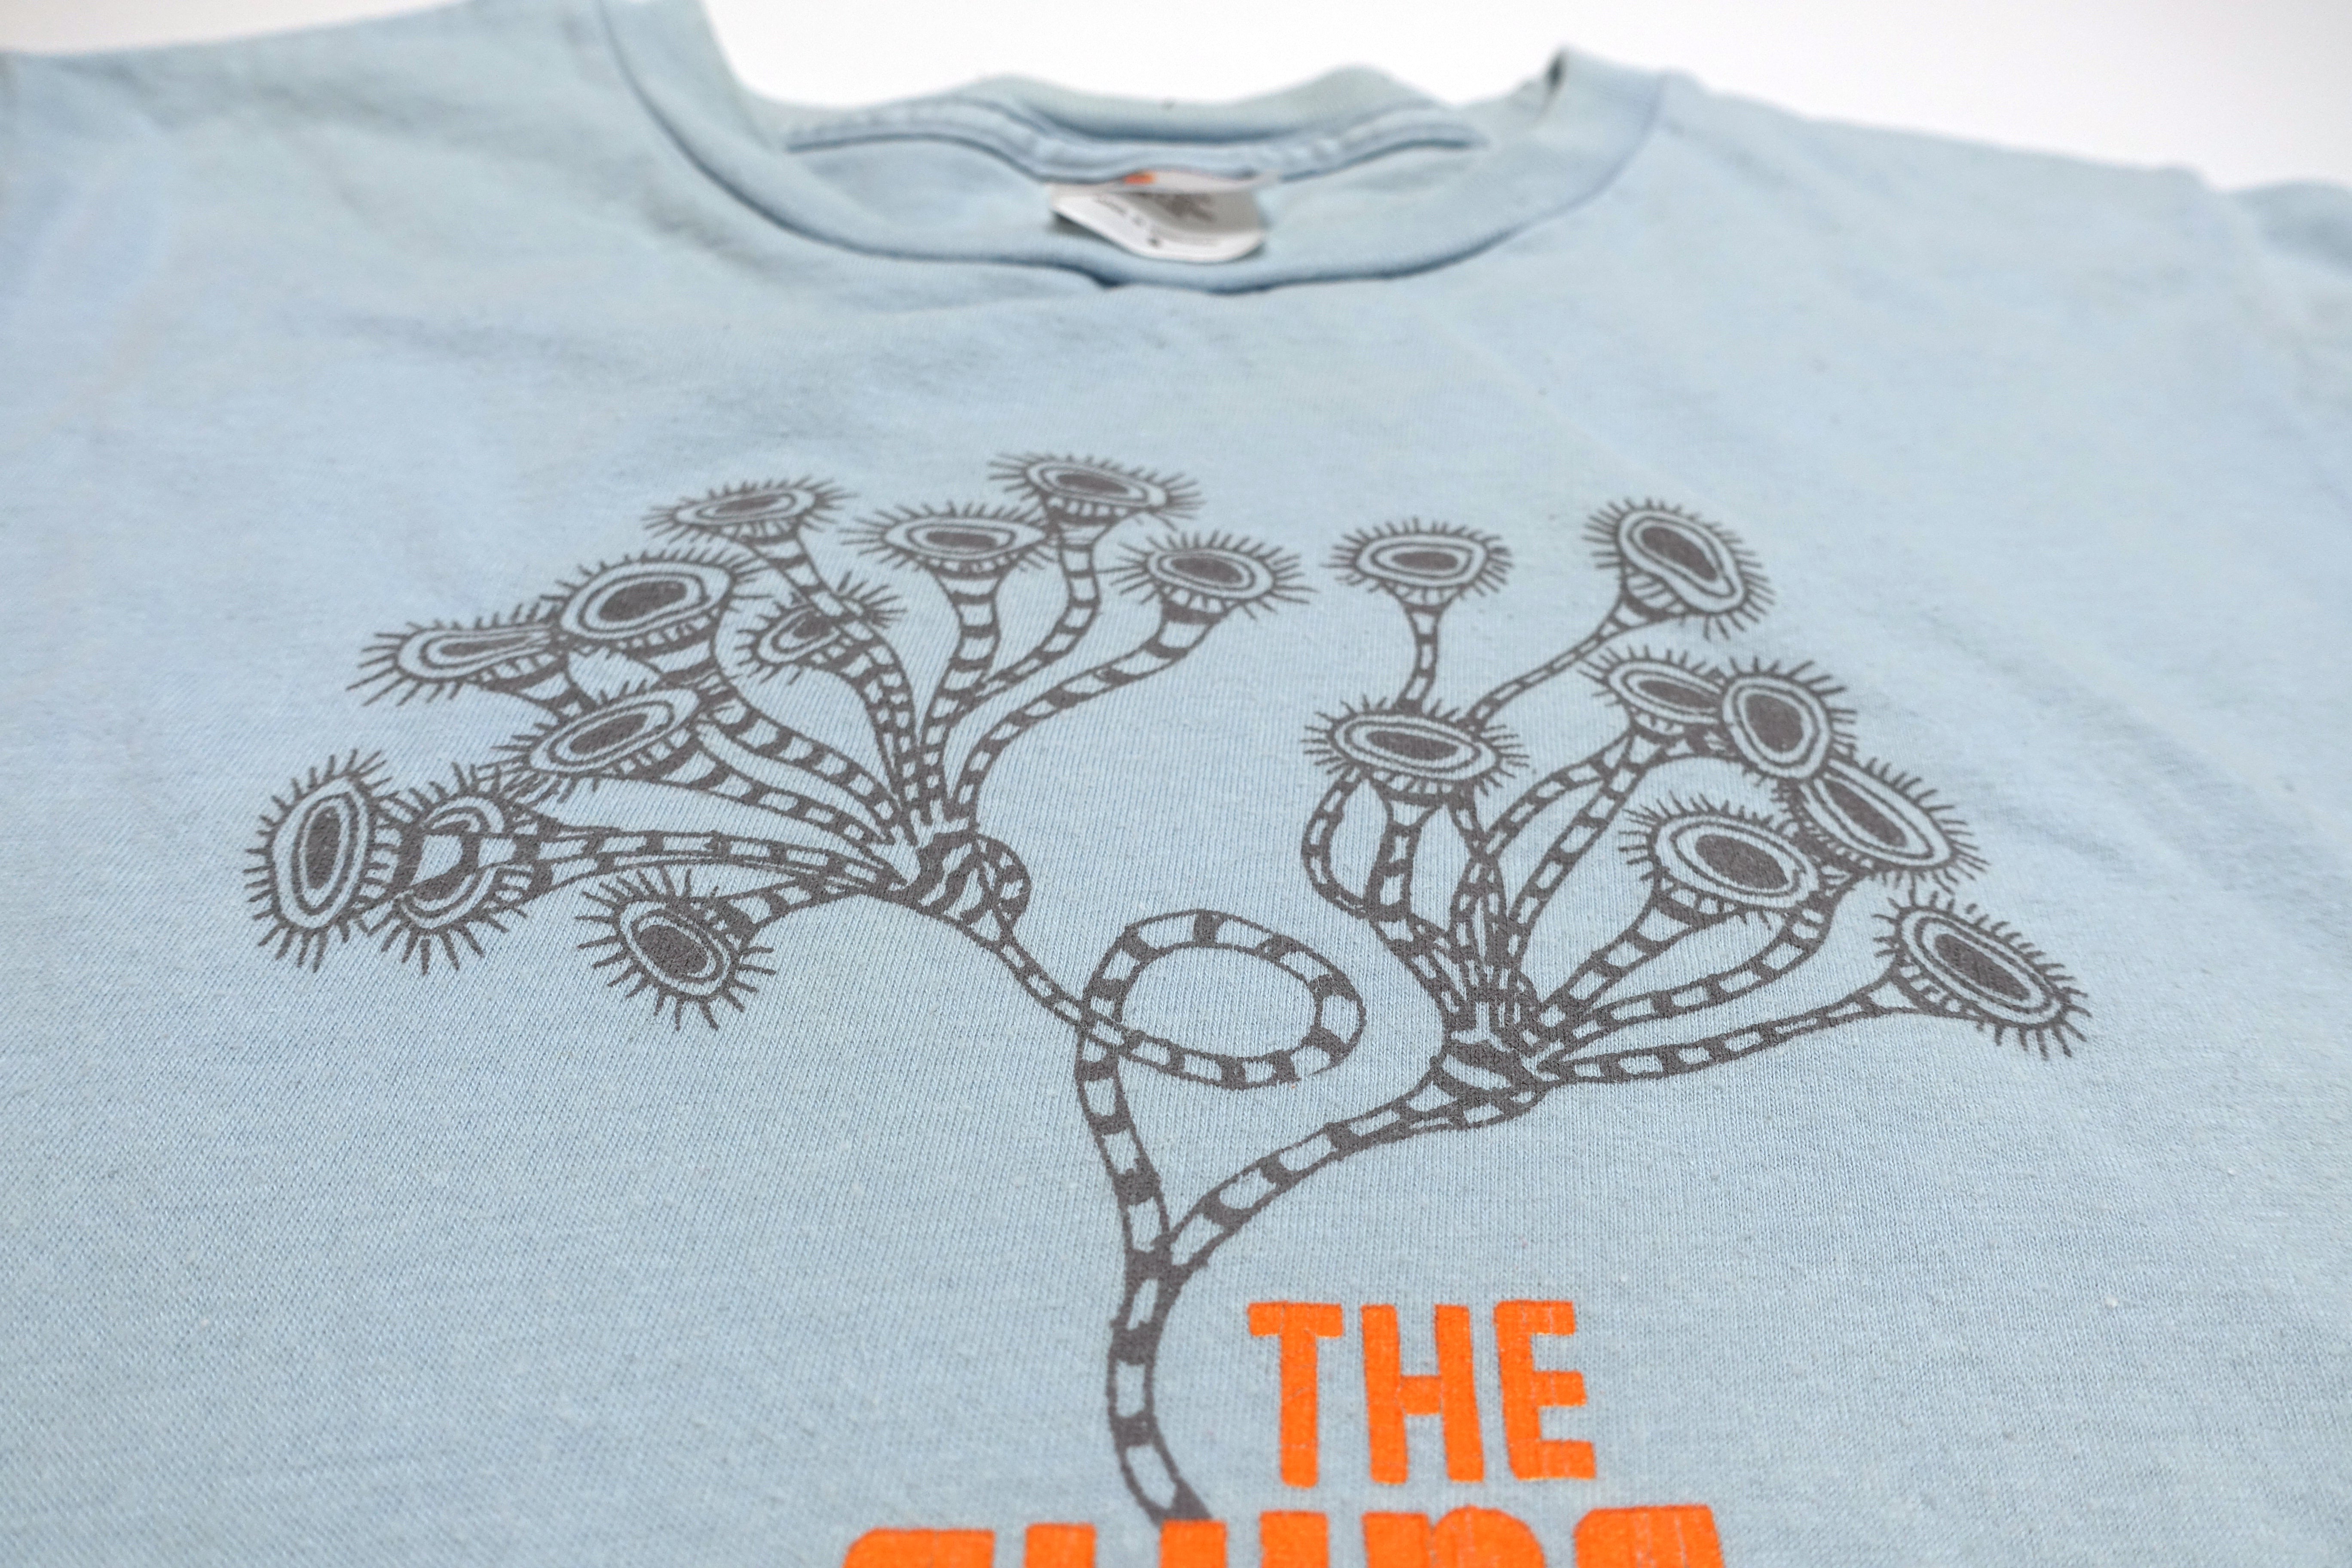 the Shins - Wincing The Night Away 2006 Tour Shirt Size Small